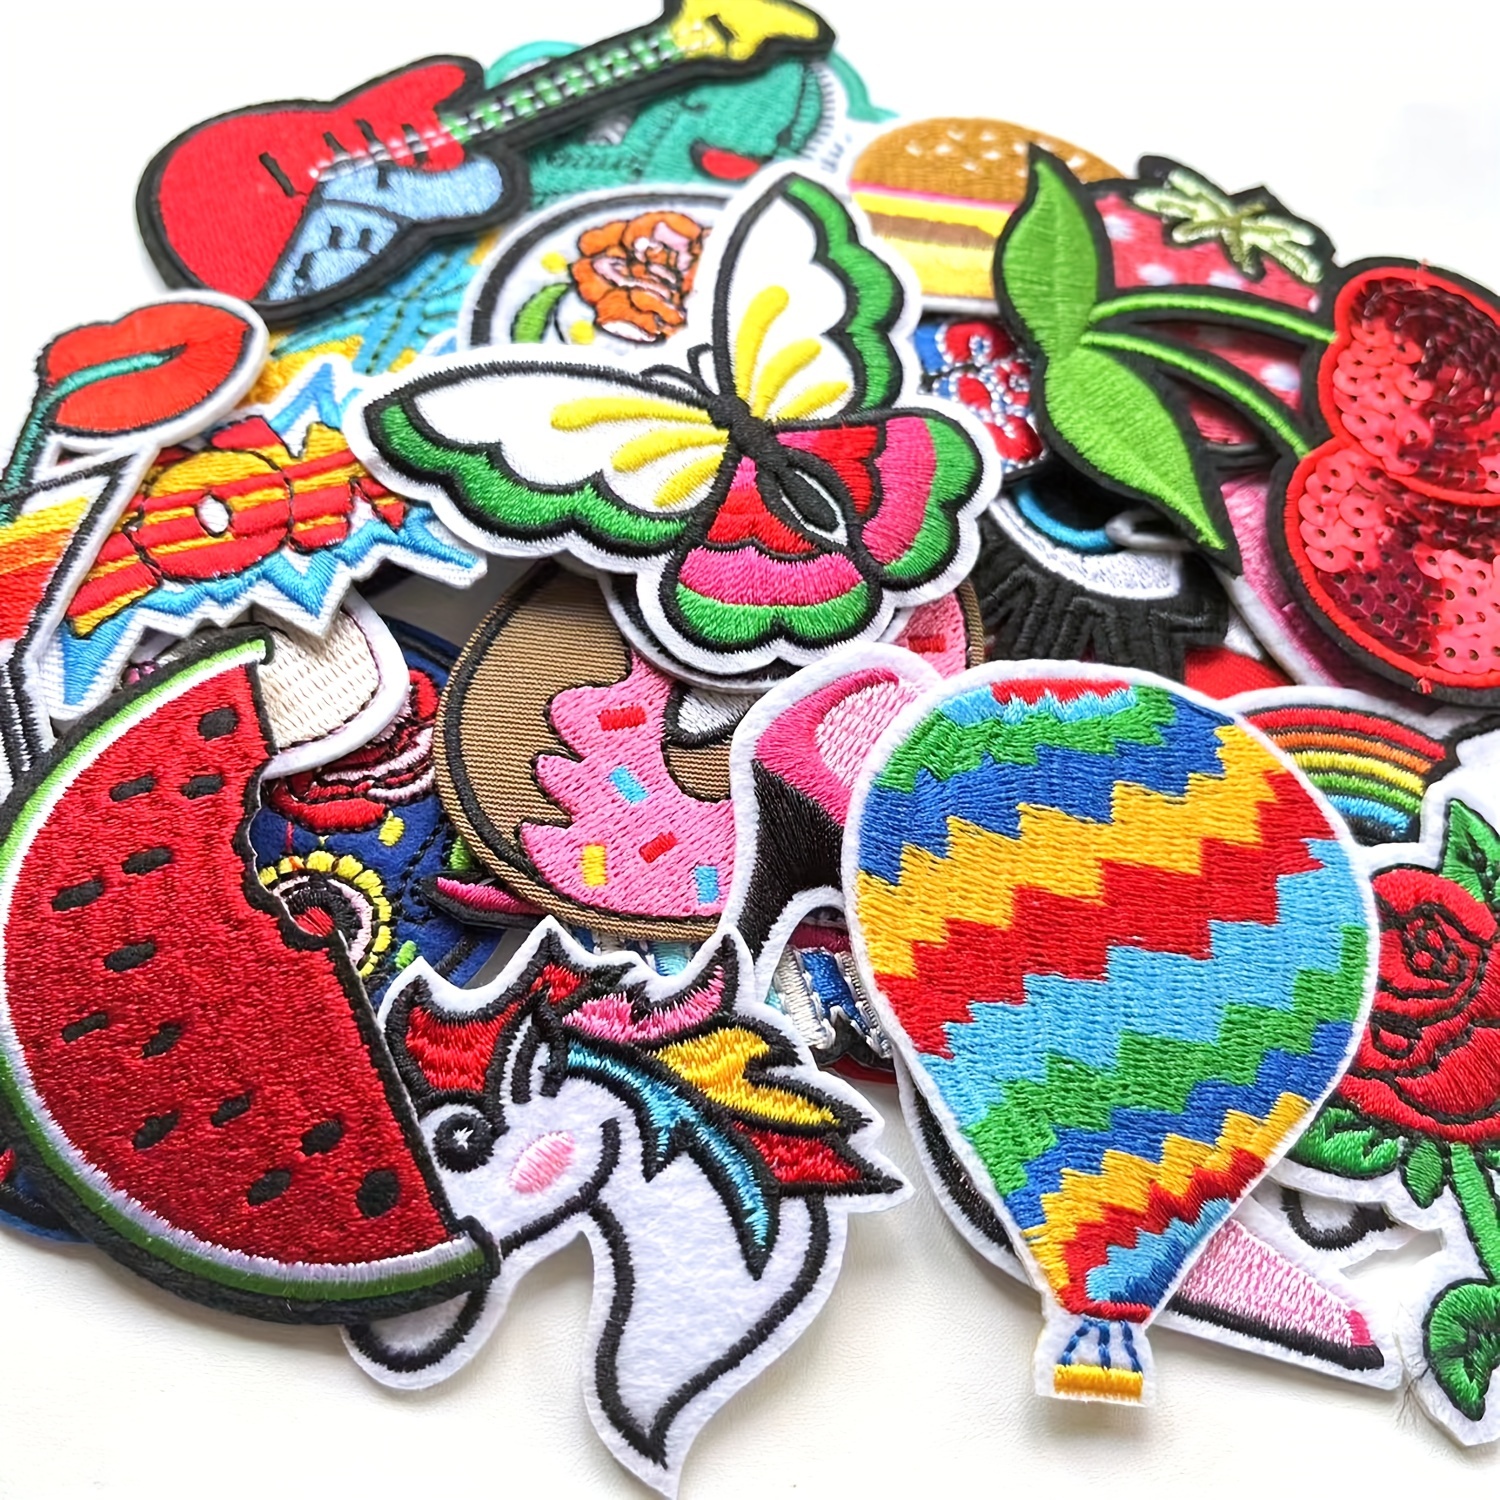 

32pcs Iron On Patches For Clothing Jackets Cute Sew On Appliques Patch Iron On Decals For Jeans Jackets Vest Backpacks Hats